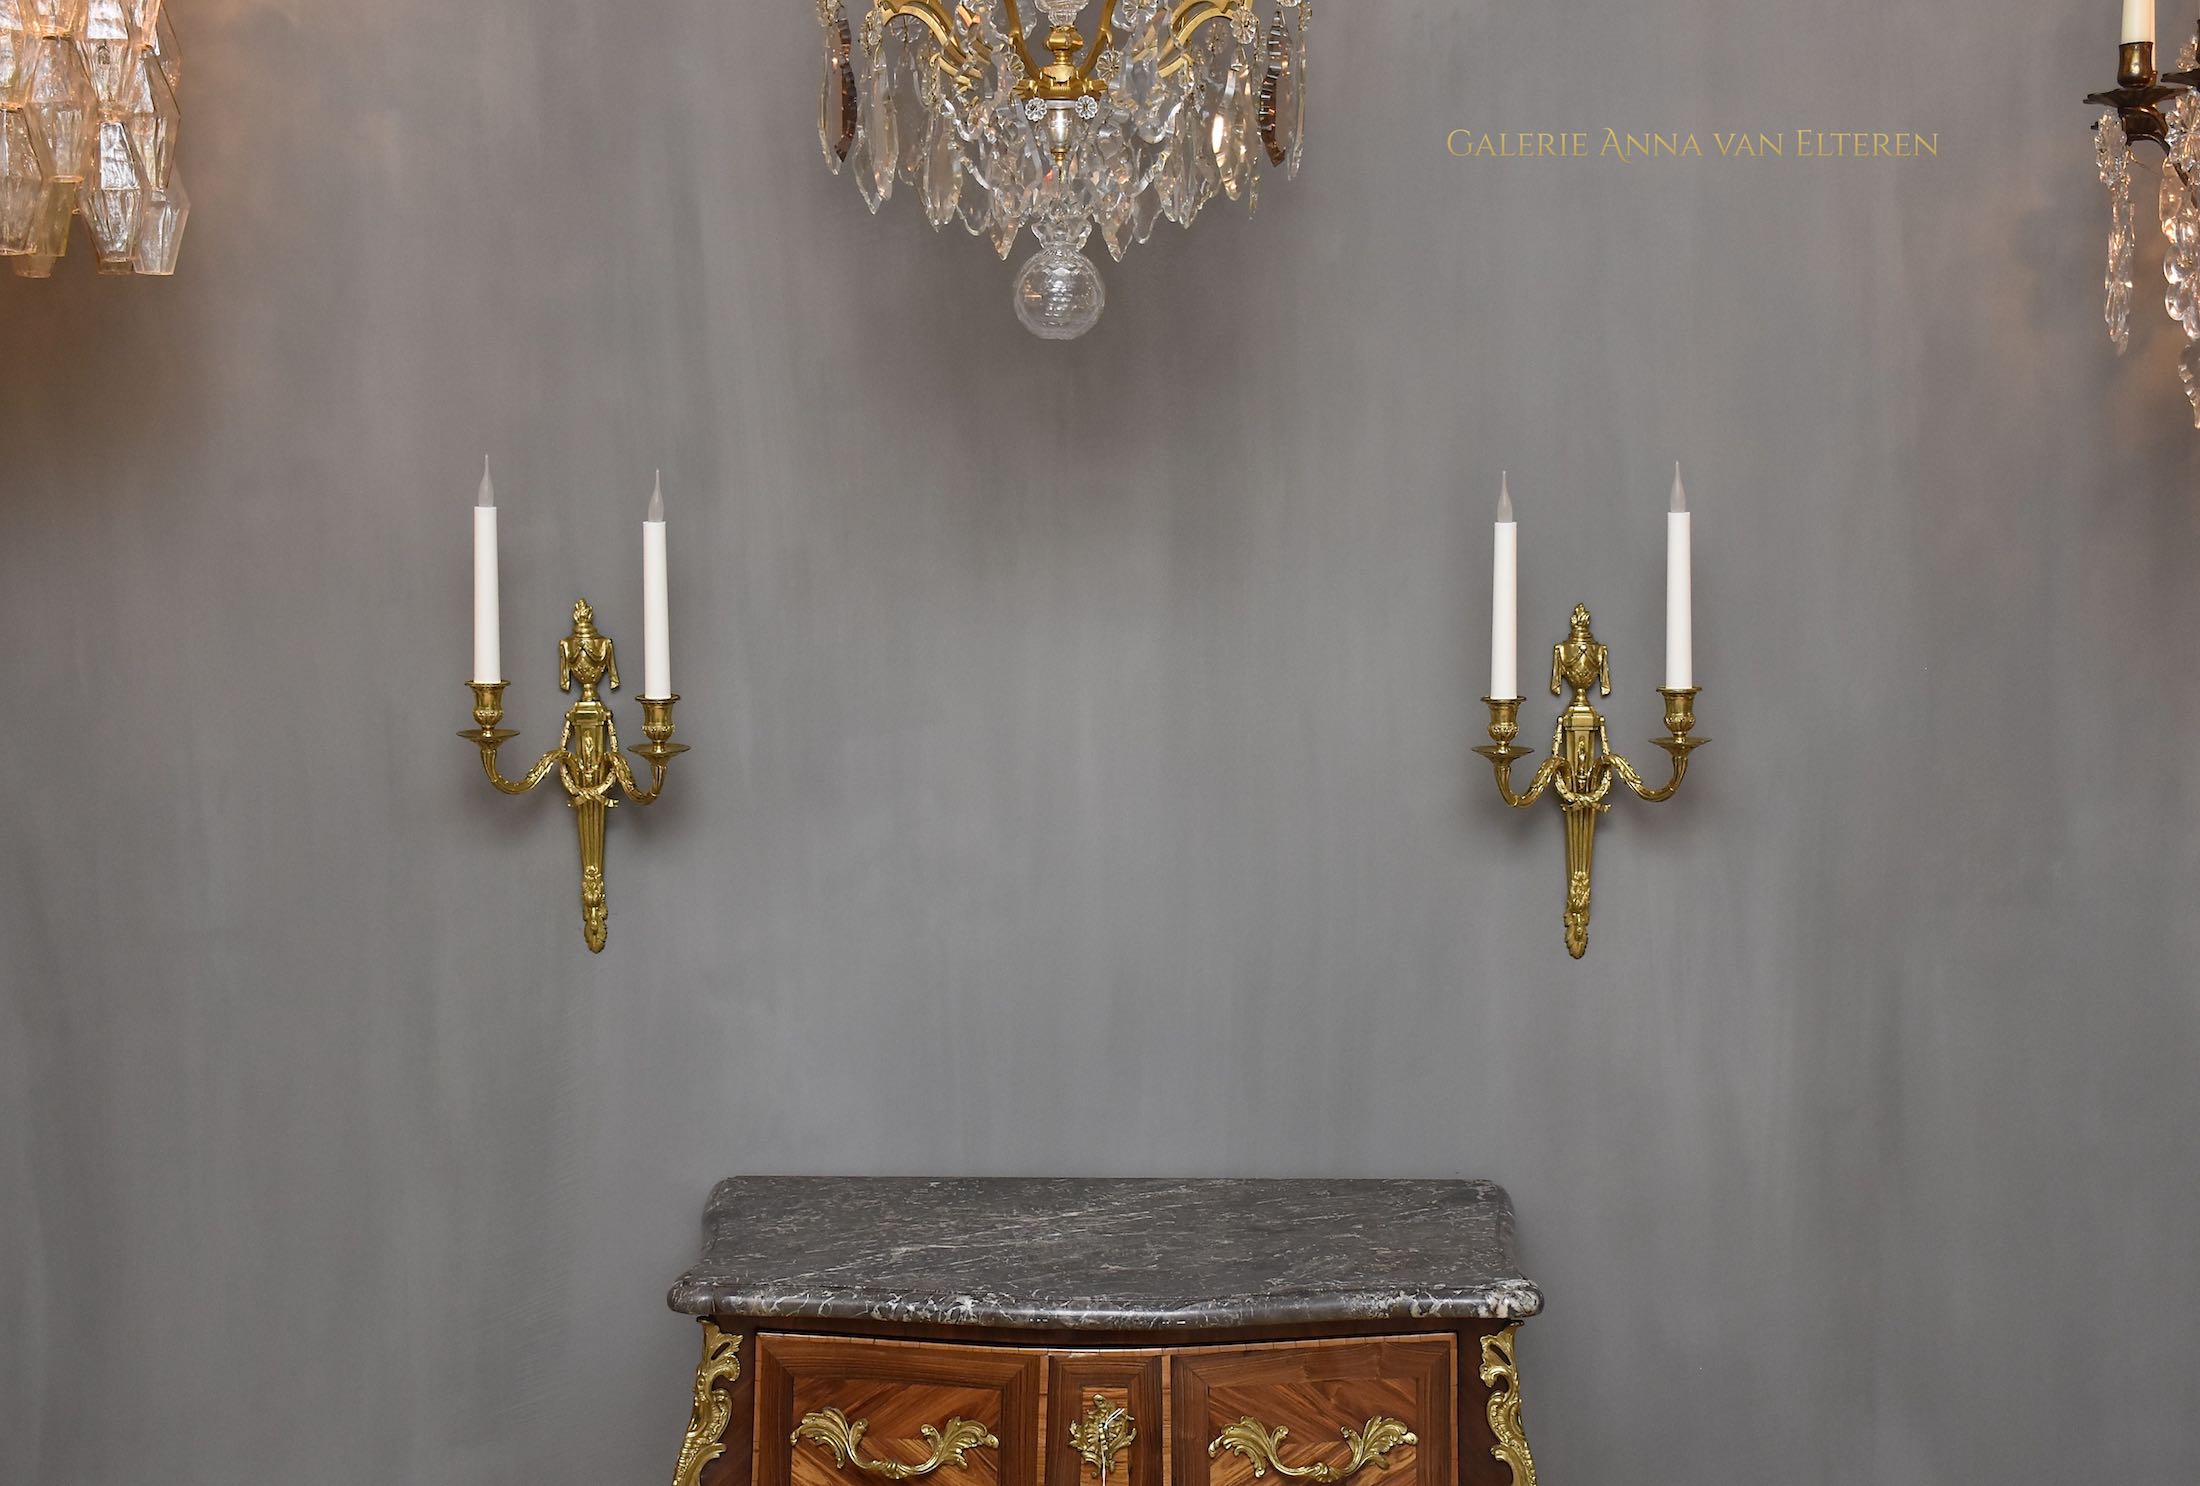 A pair of 19th c. gilt bronze wall appliques in the style of Louis XVI